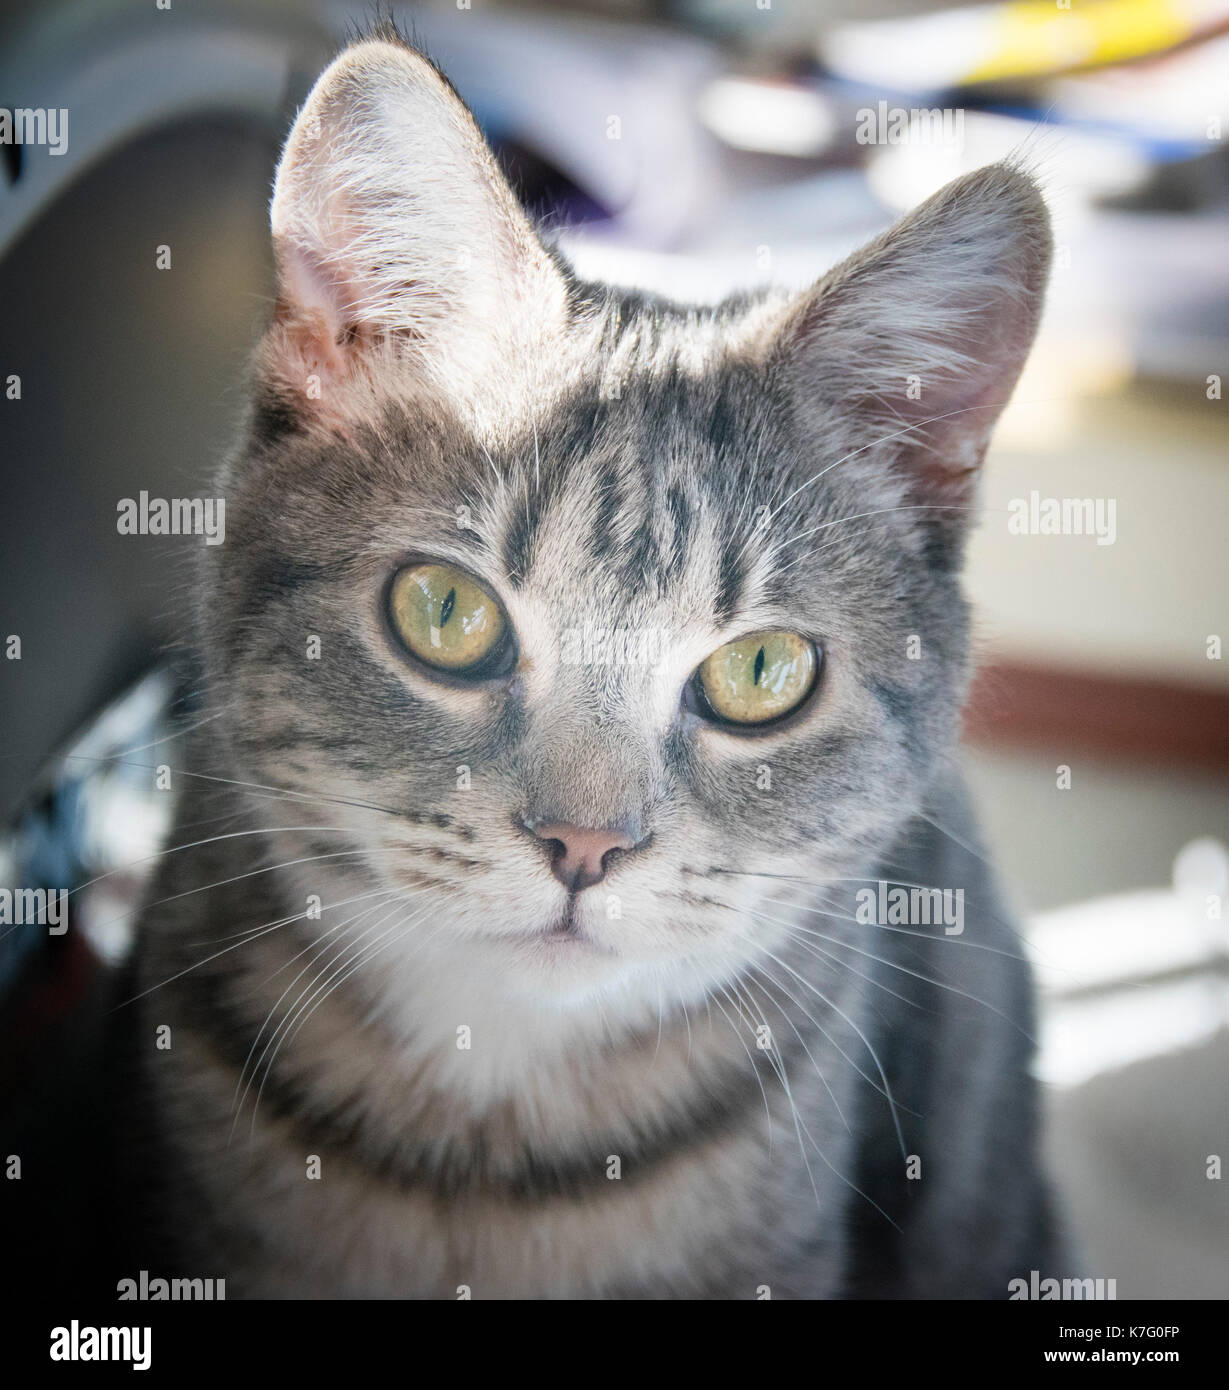 Cat portrait, grey tubby, green eyes.  Close up, cute kitten portrait, grey tubby, green eyes. Stock Photo